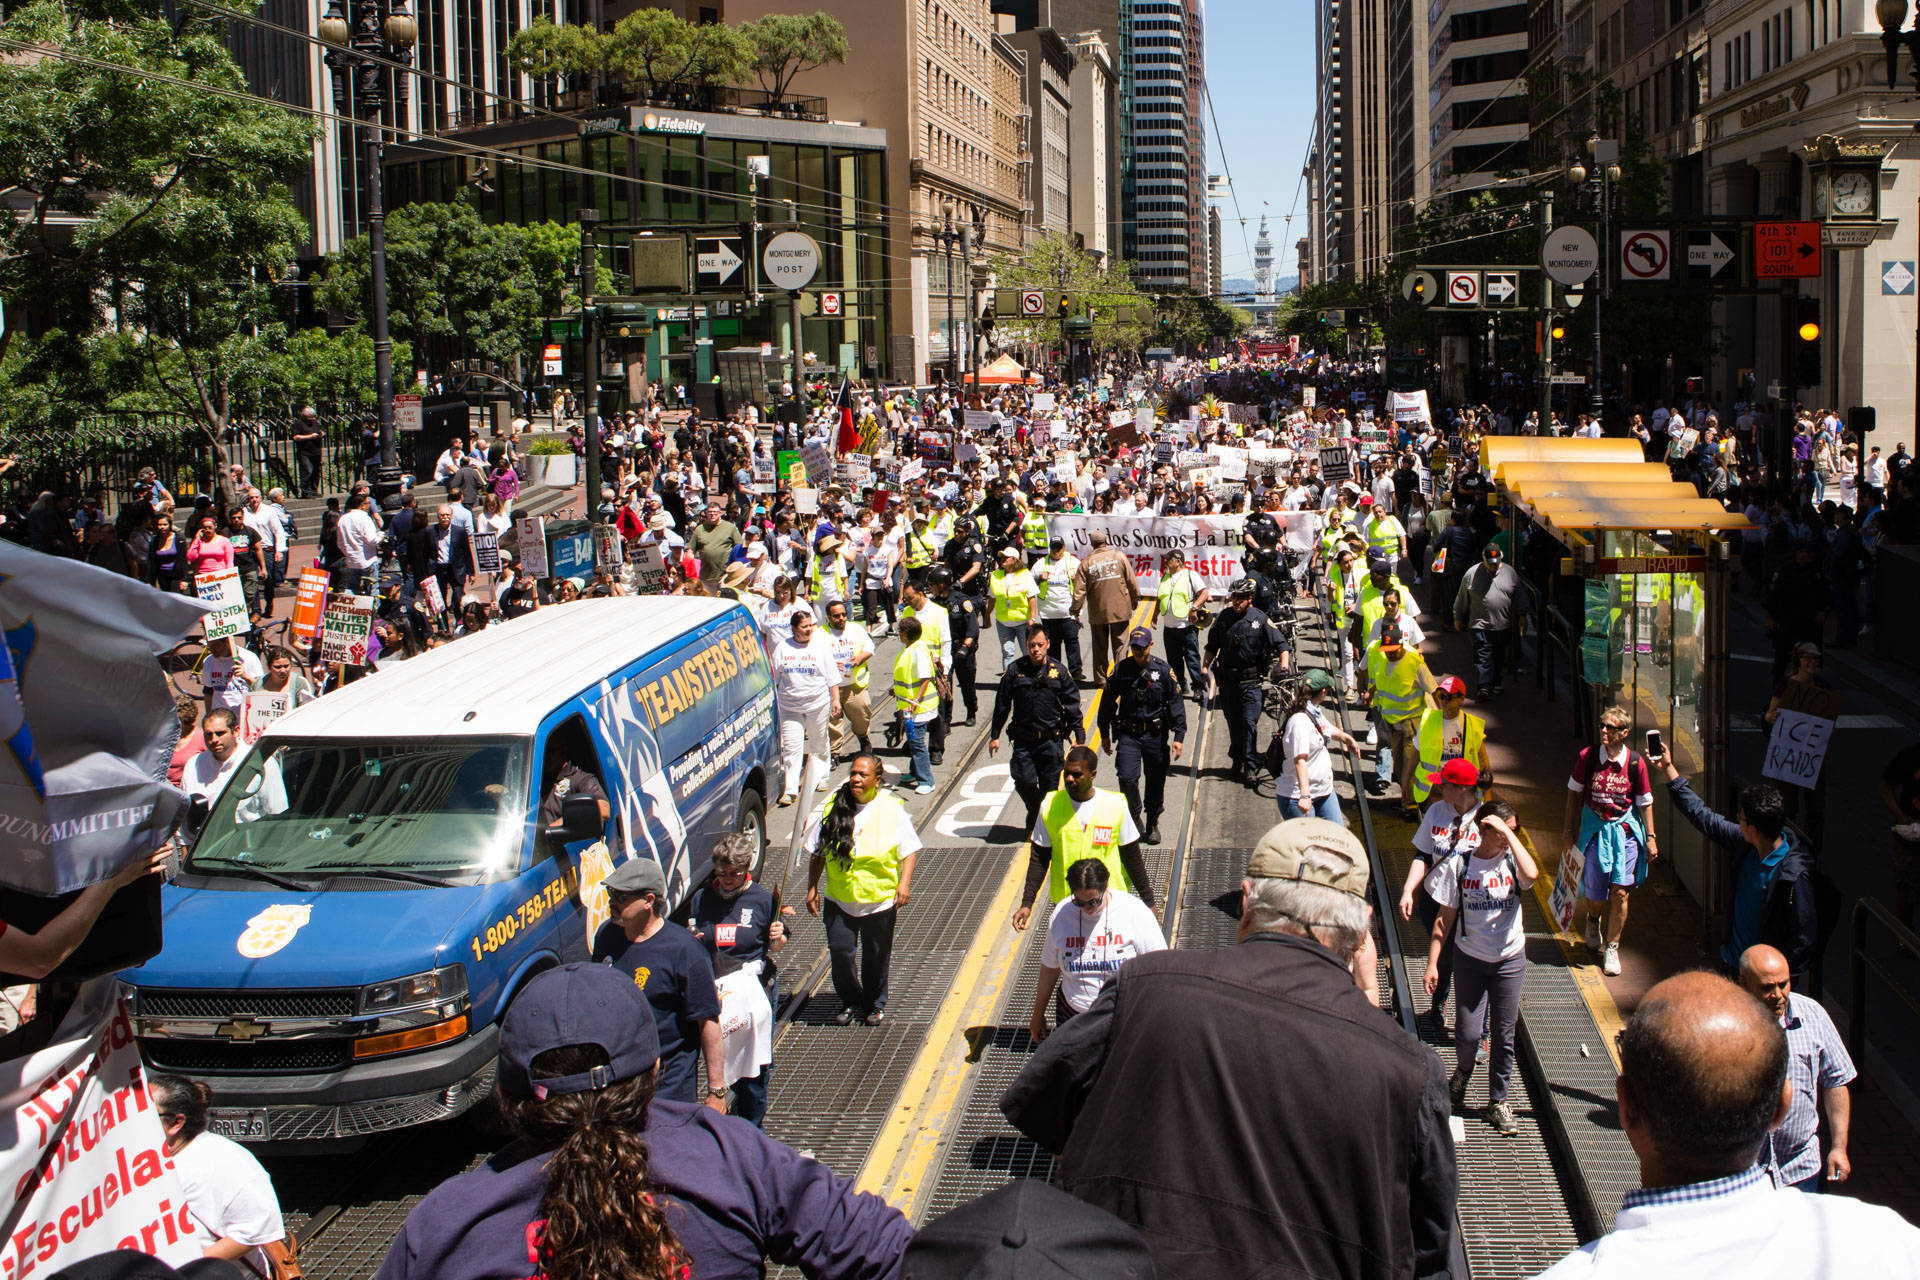 Thousands of people marched through downtown San Francisco for May Day on May 1, 2017. The holiday is also known as International Workers' Day and Bay Area protests focused on the concerns of immigrant workers, including undocumented laborers. Bert Johnson/KQED